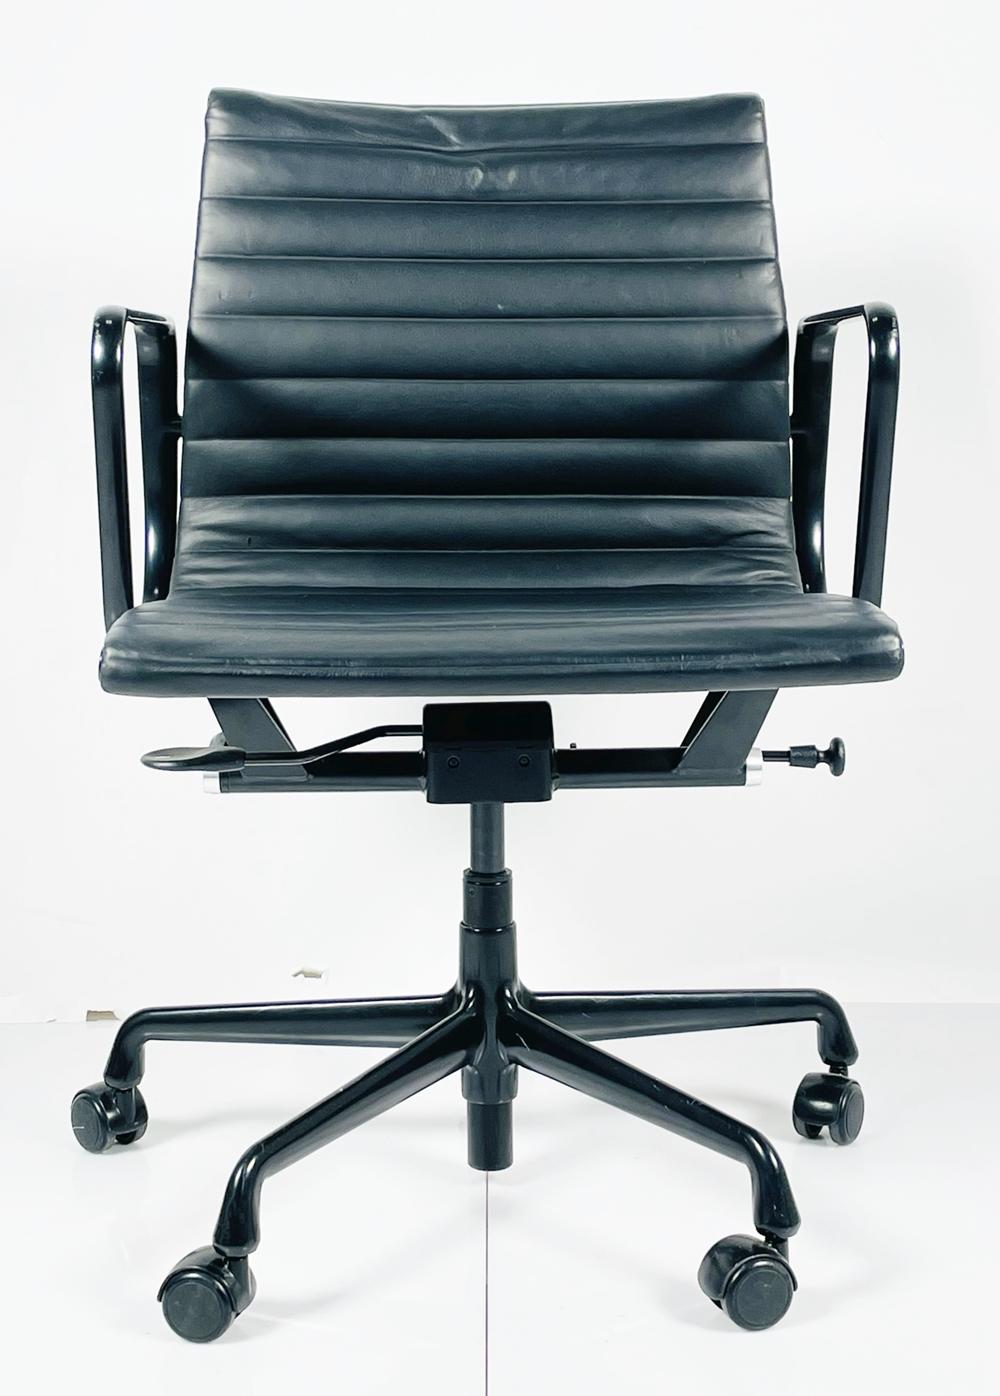 Eames Aluminum group office chairs in black leather.
The Eames management chair is part of the Eames Aluminum Group Collection. These distinctive chairs resulted from the Eames's experimentation with aluminum, which became more affordable after